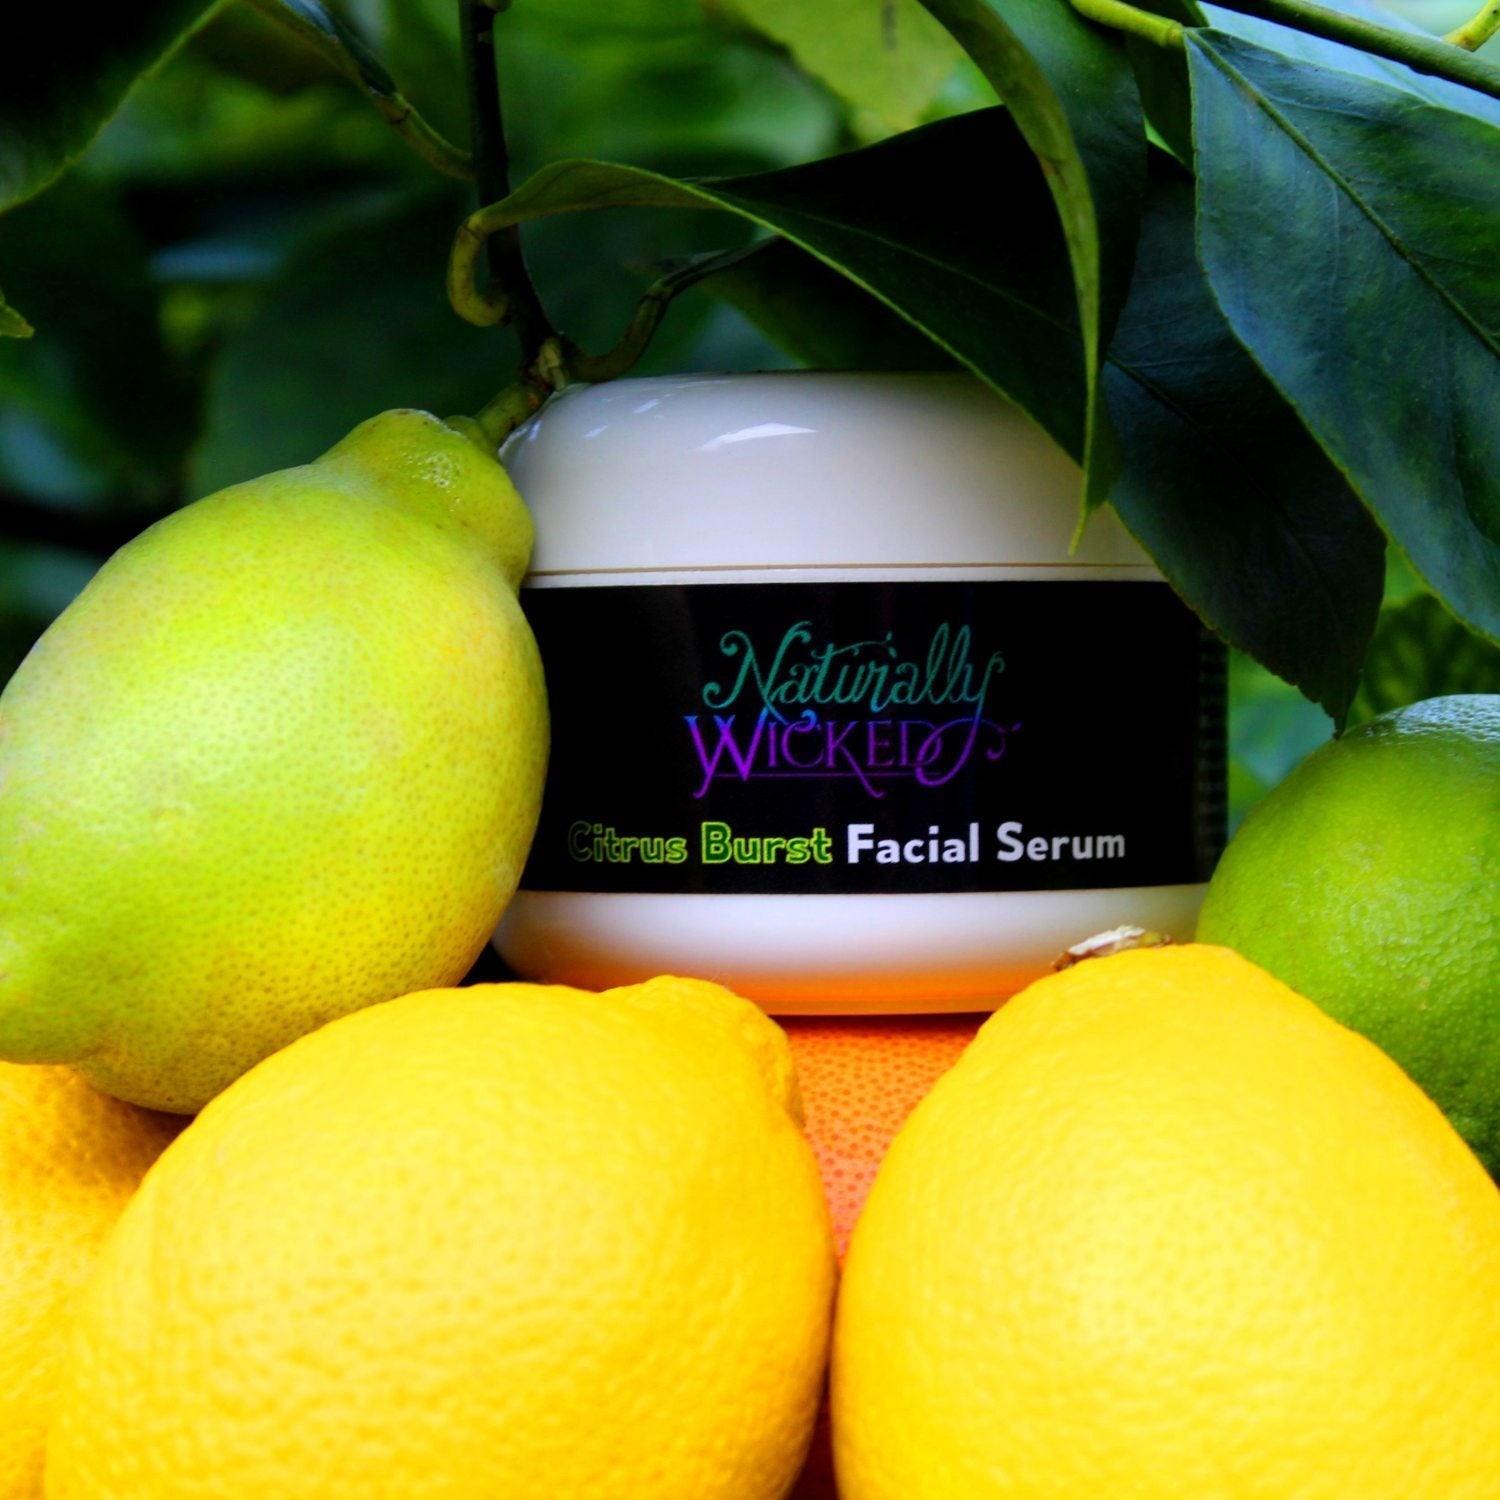 Naturally Wicked Citrus Burst Facial Serum Surrounded By Lemons & Limes Outdoors